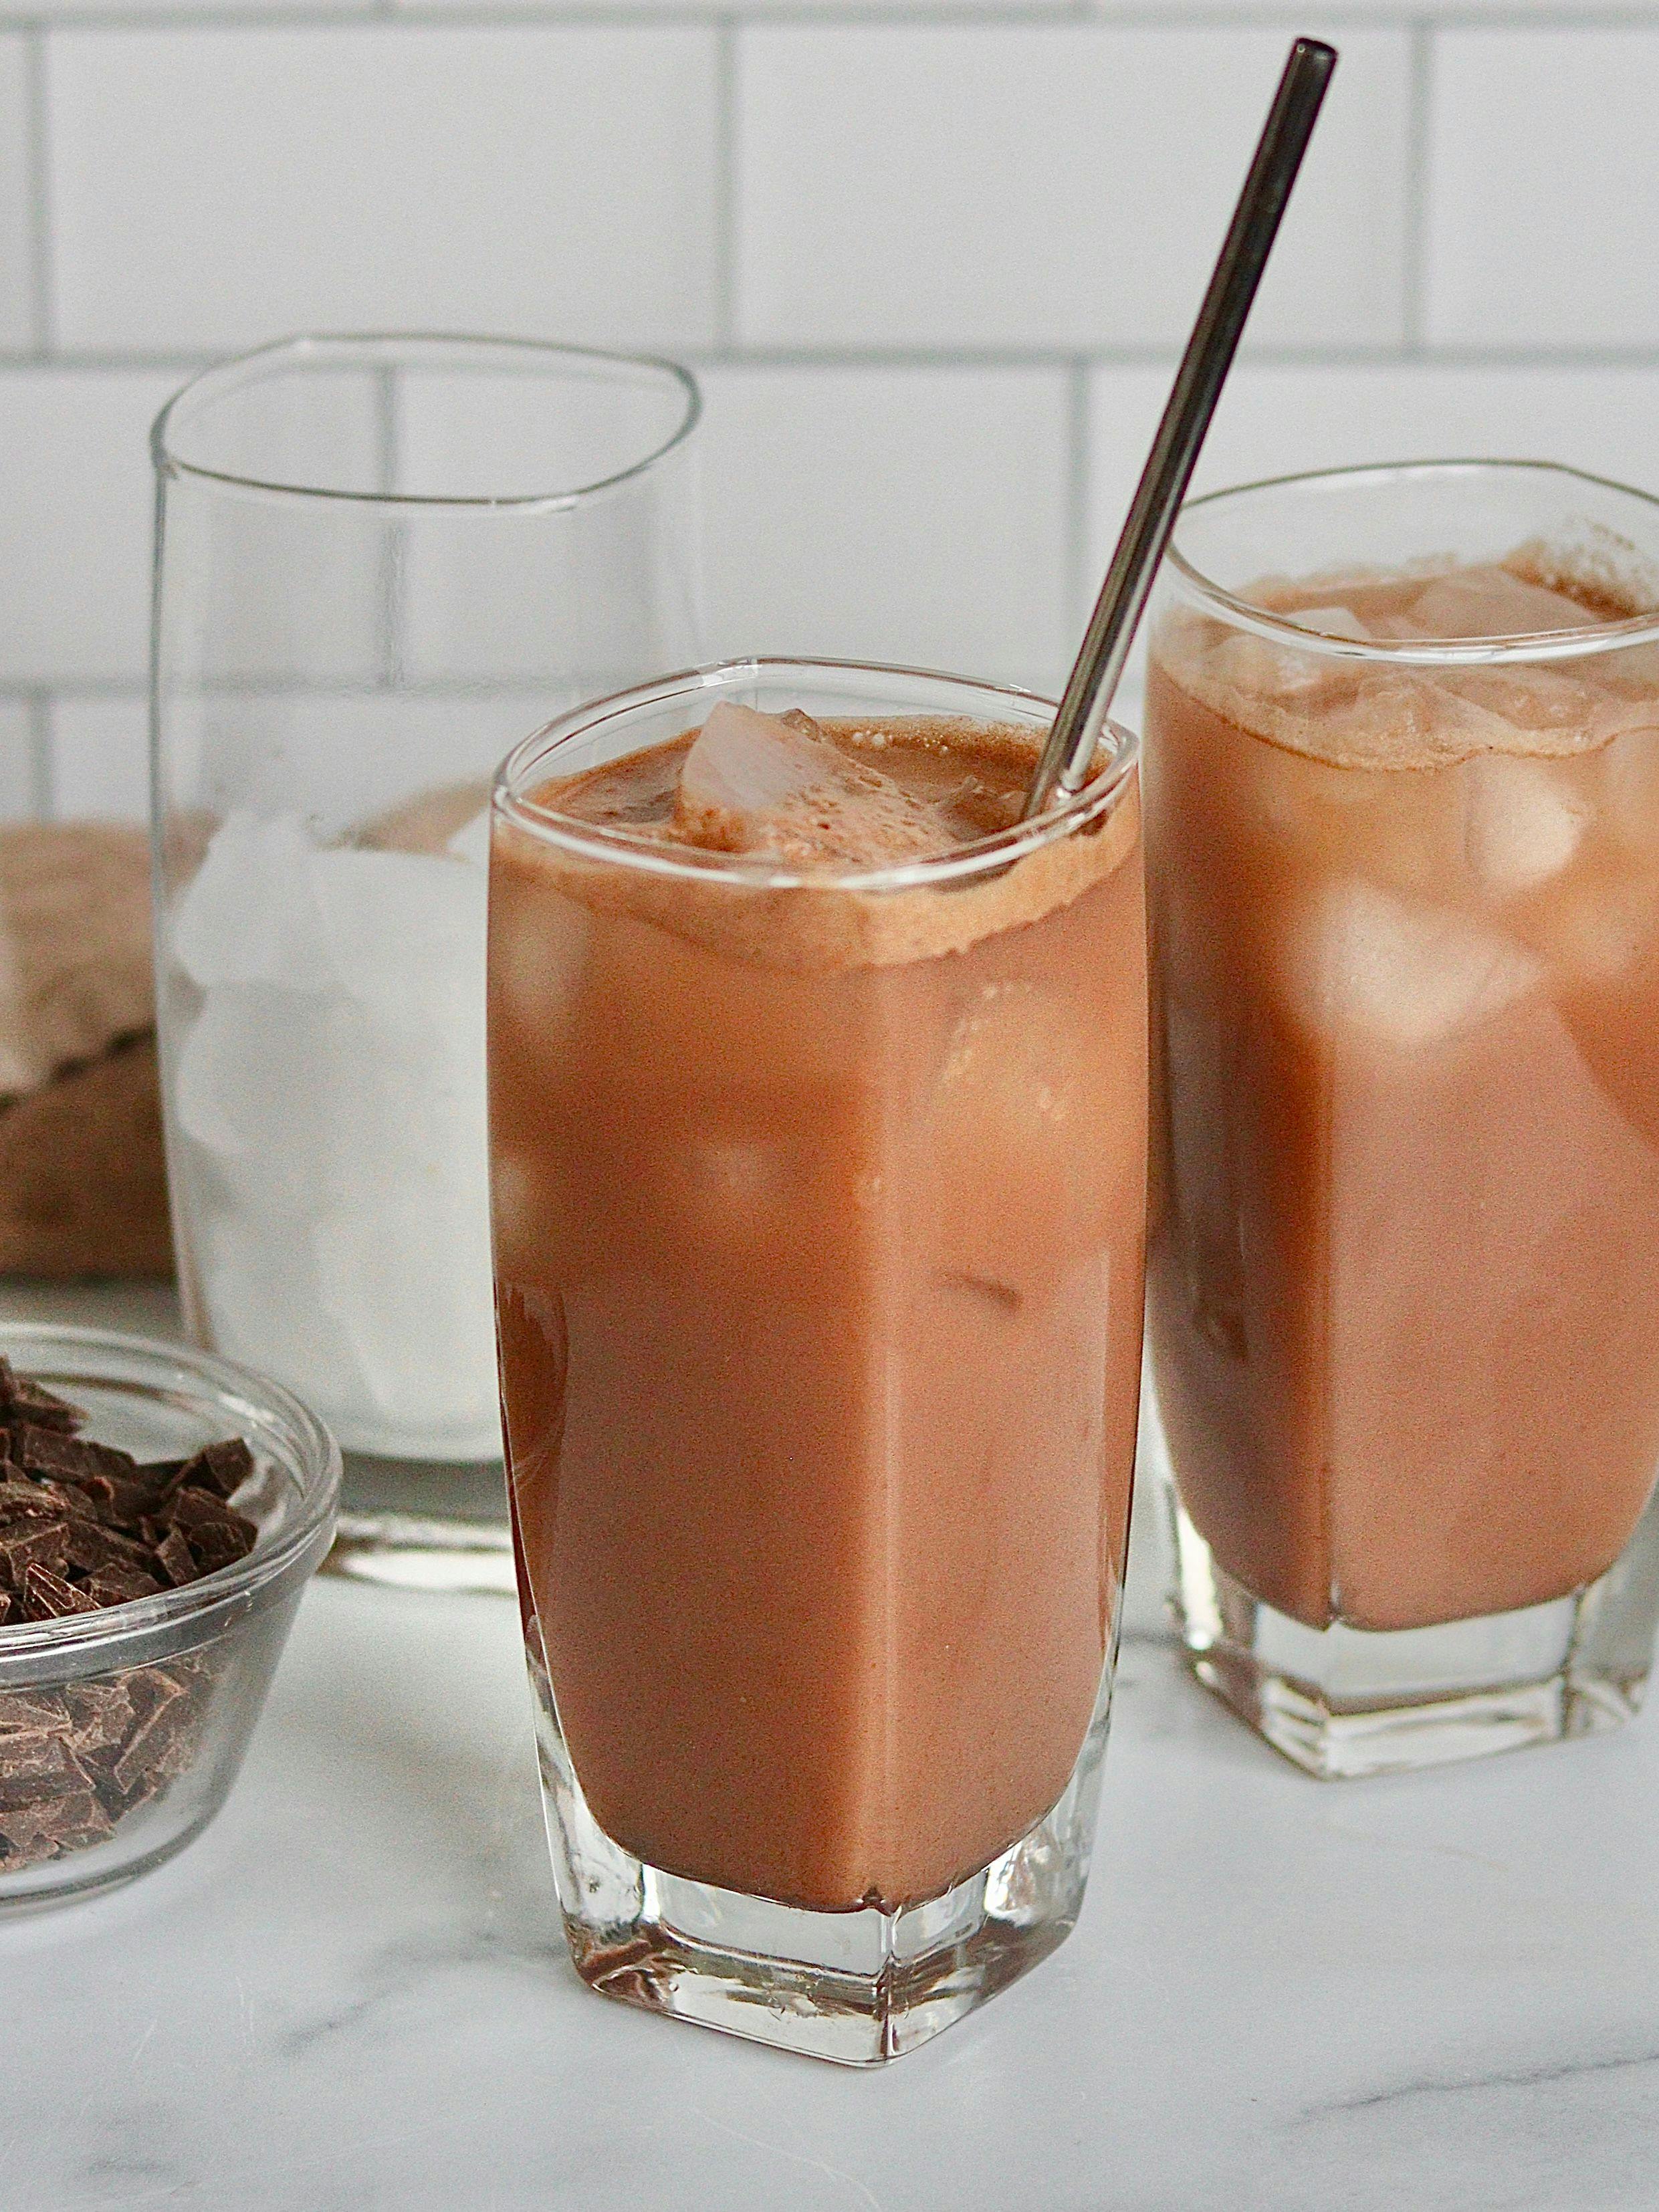 Two glasses of iced hot chocolate on a counter with organic whole milk and chocolate pieces.